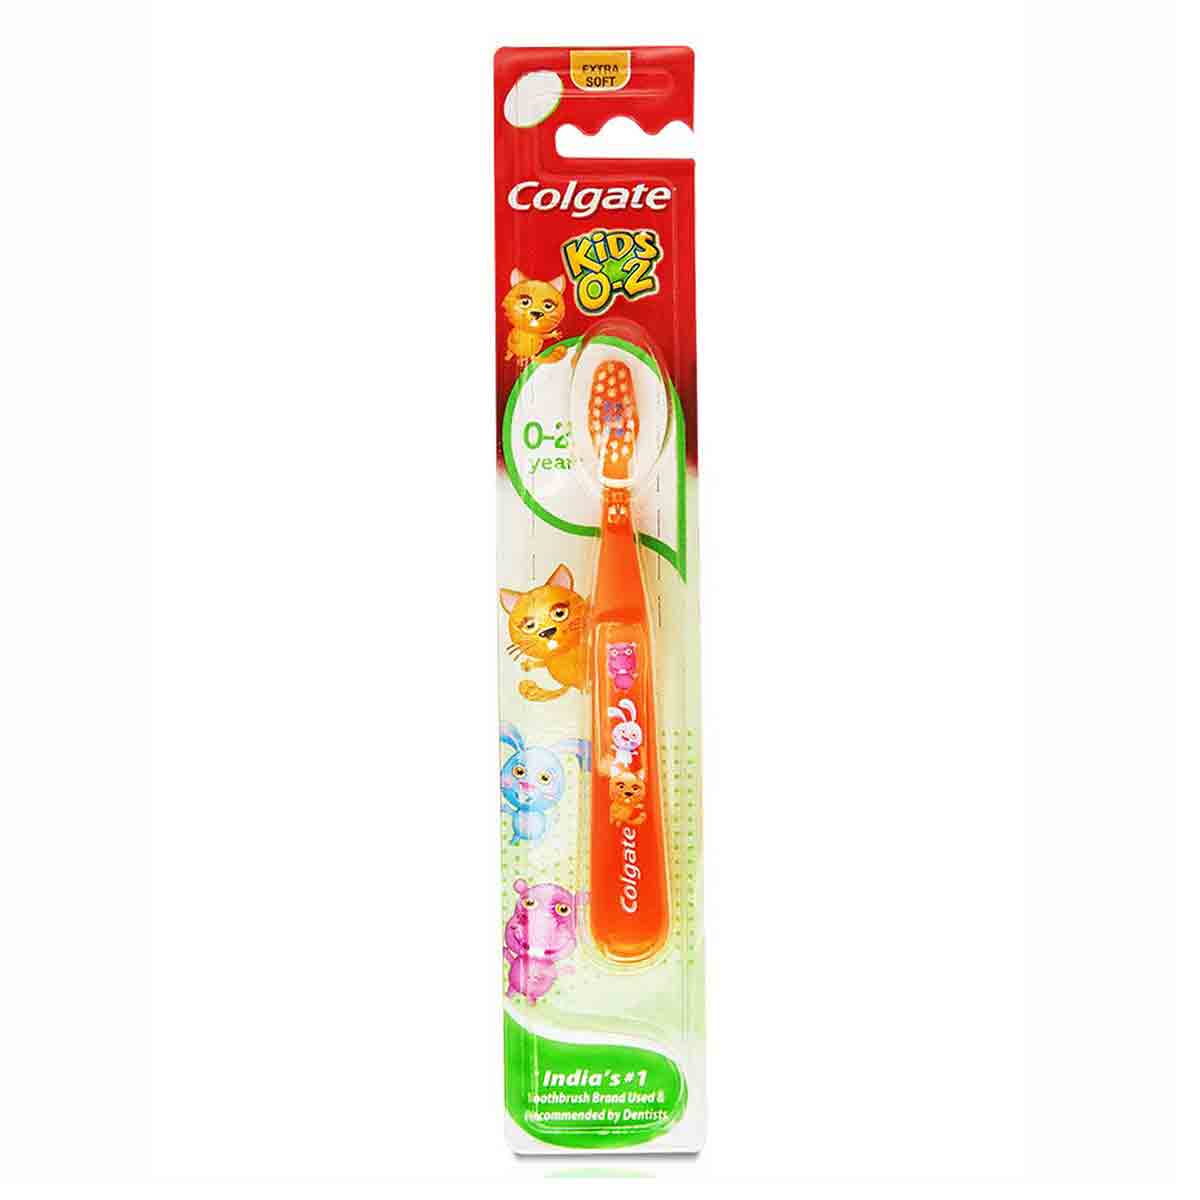 Buy Colgate Kids Extra Soft Toothbrush 0 to 2 Years, 1 Count Online